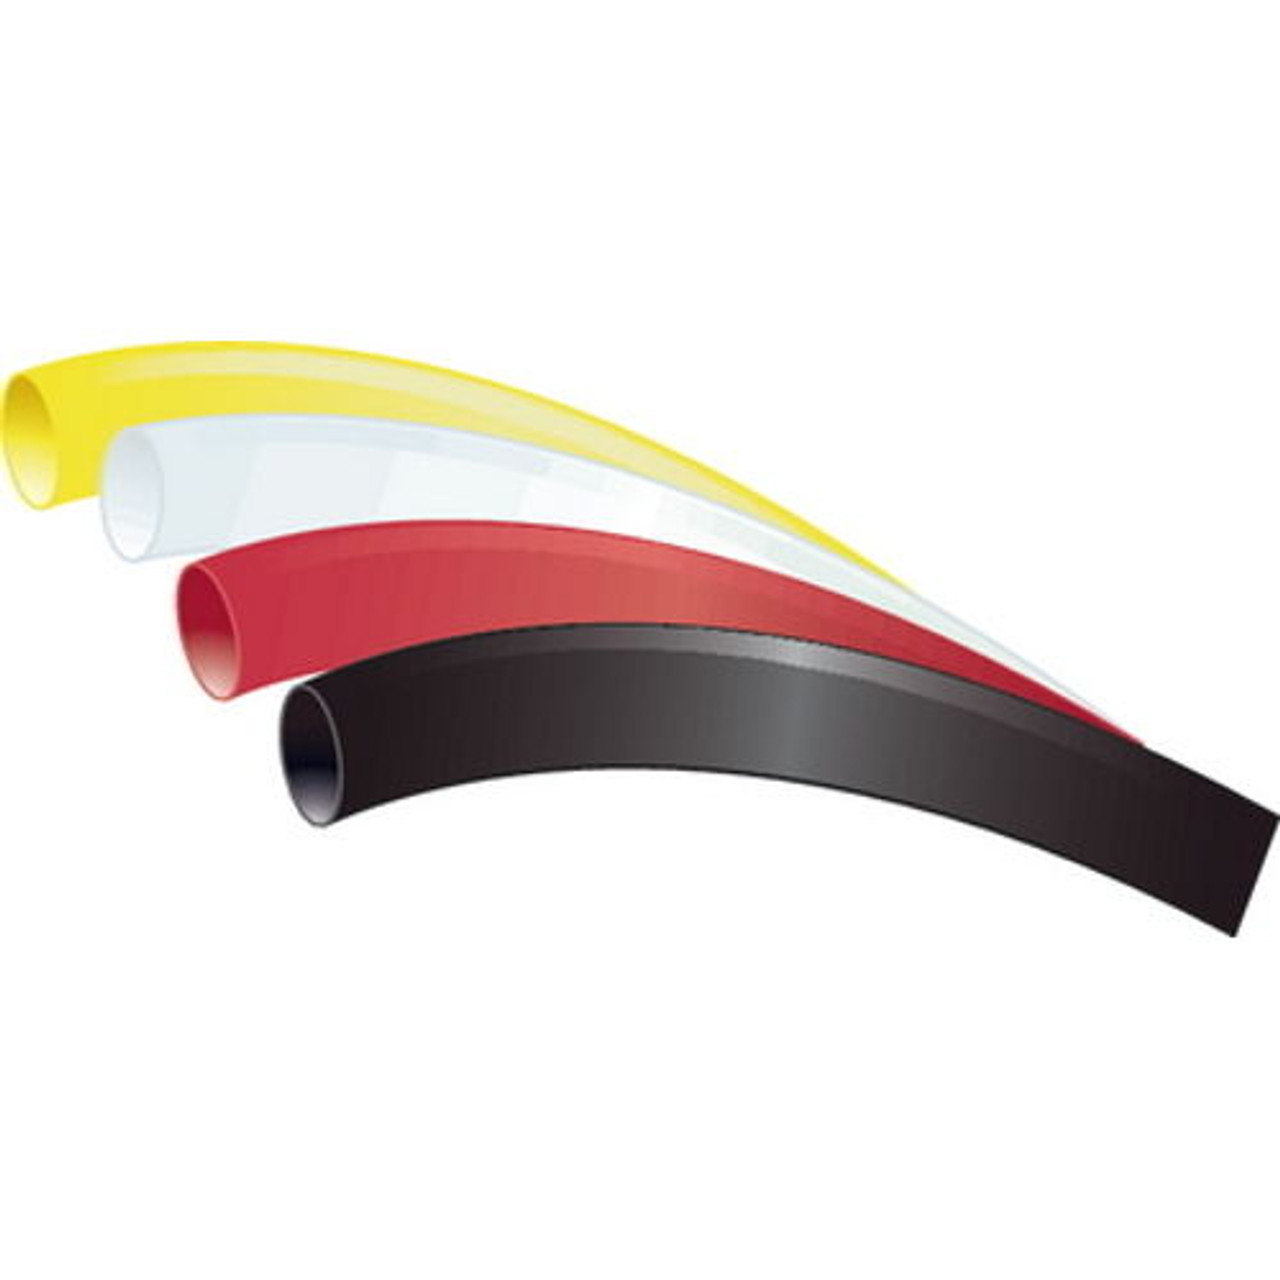 4 Pack of Assorted Colors 3/4 Inch x 3 Inch 3:1 Heat Shrink Tubing with Sealant